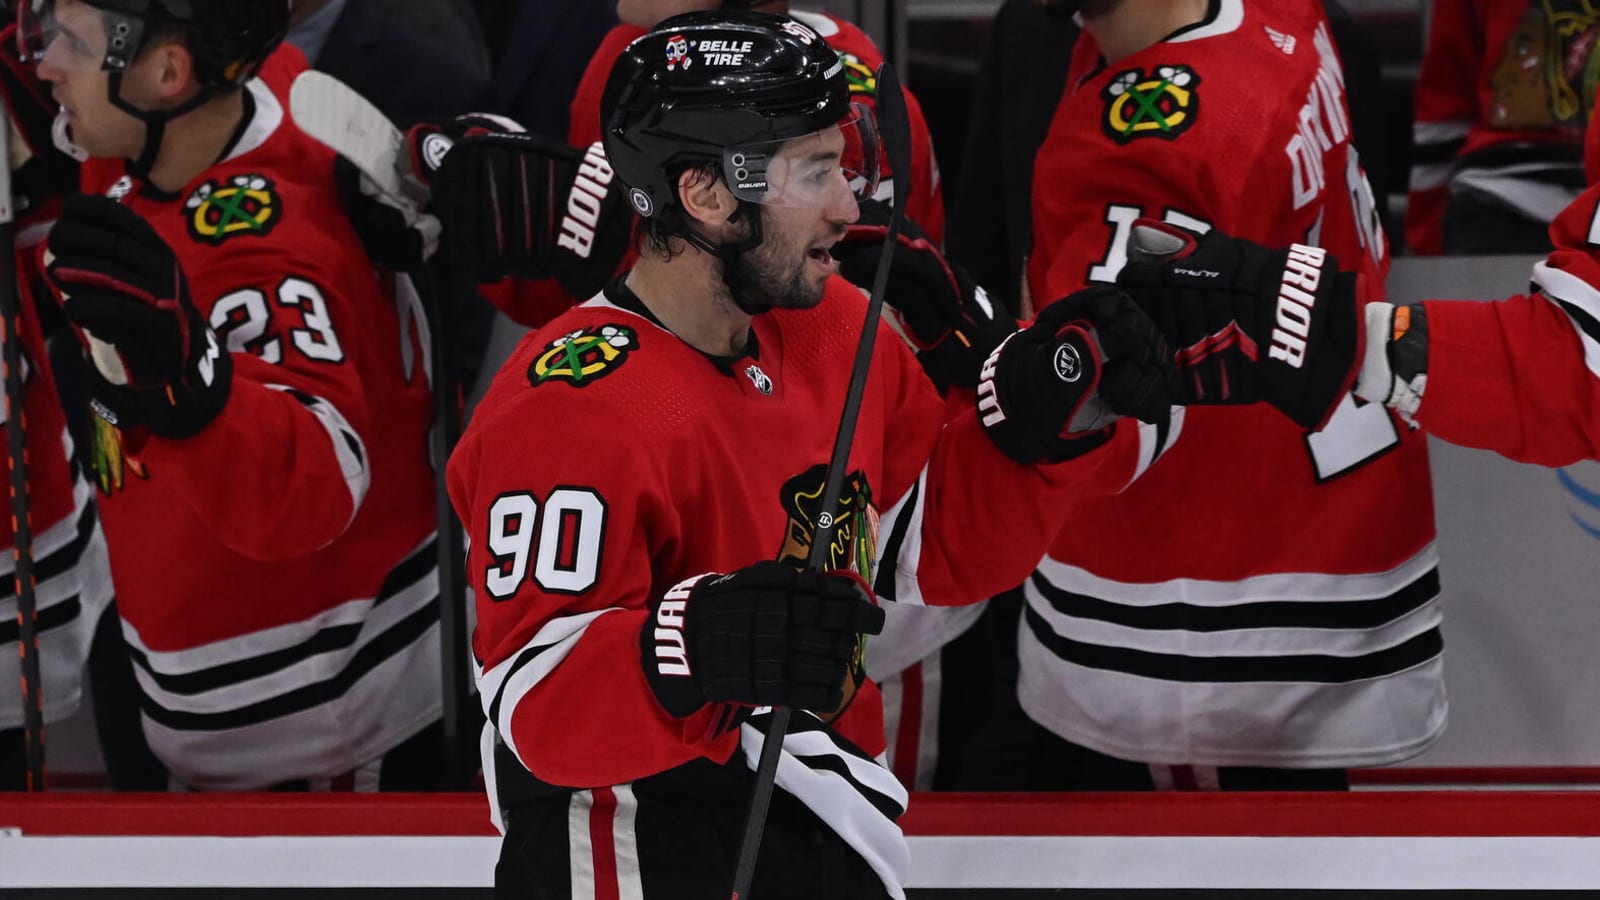 Blackhawks place Tyler Johnson on injured reserve with right ankle injury